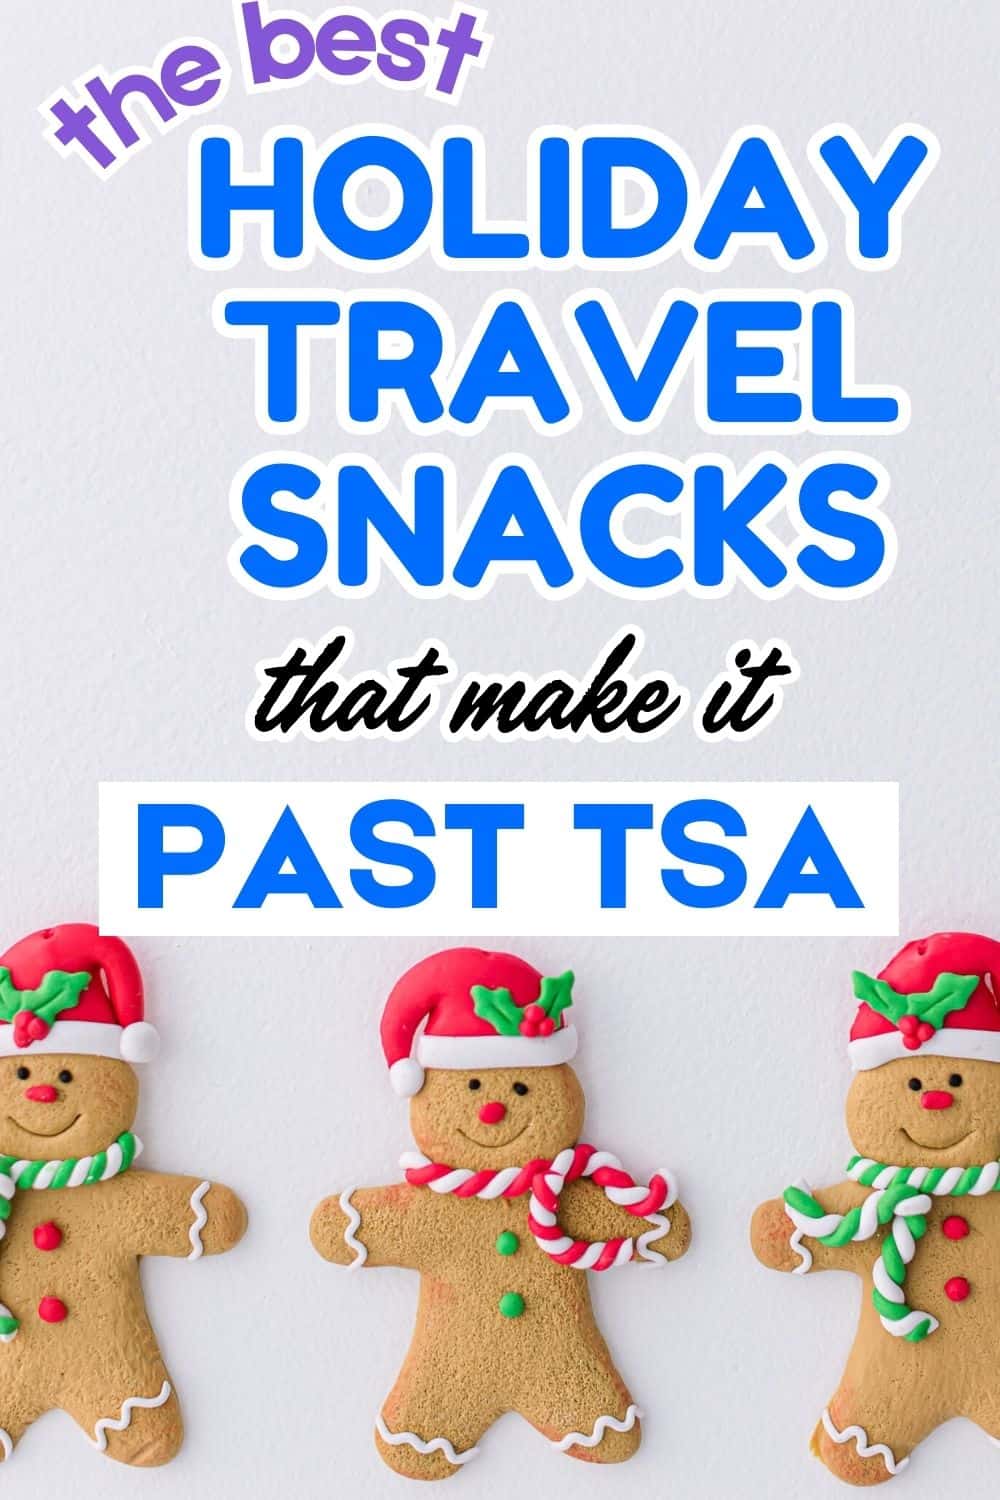 Text "the best holiday travel snacks that make it past TSA" with a picture of three gingerbread men